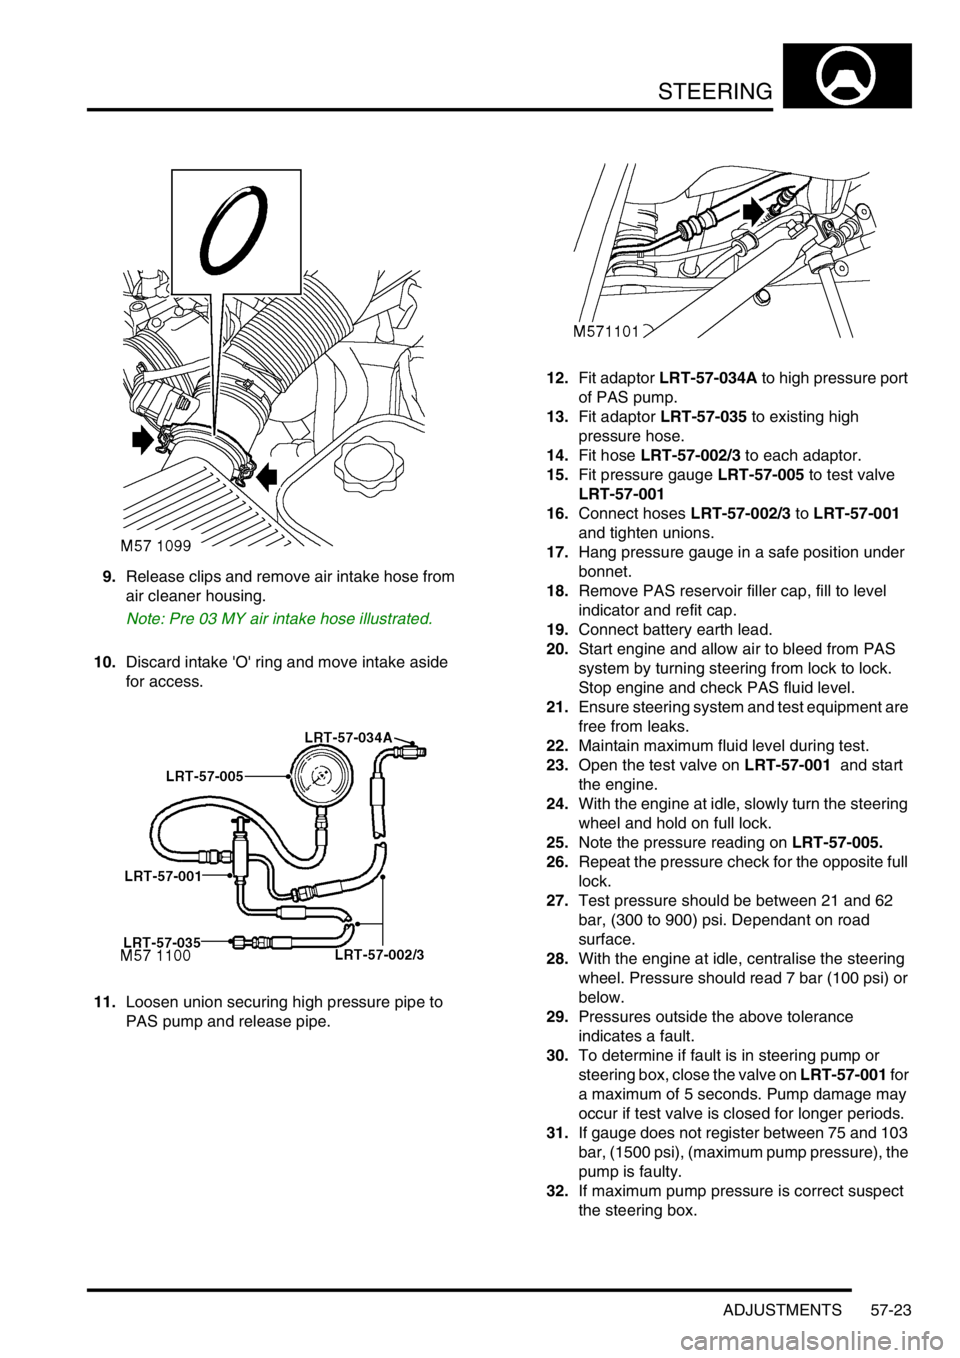 LAND ROVER DISCOVERY 2002 Owners Manual STEERING
ADJUSTMENTS 57-23
9.Release clips and remove air intake hose from 
air cleaner housing.
Note: Pre 03 MY air intake hose illustrated.
10.Discard intake O ring and move intake aside 
for acce